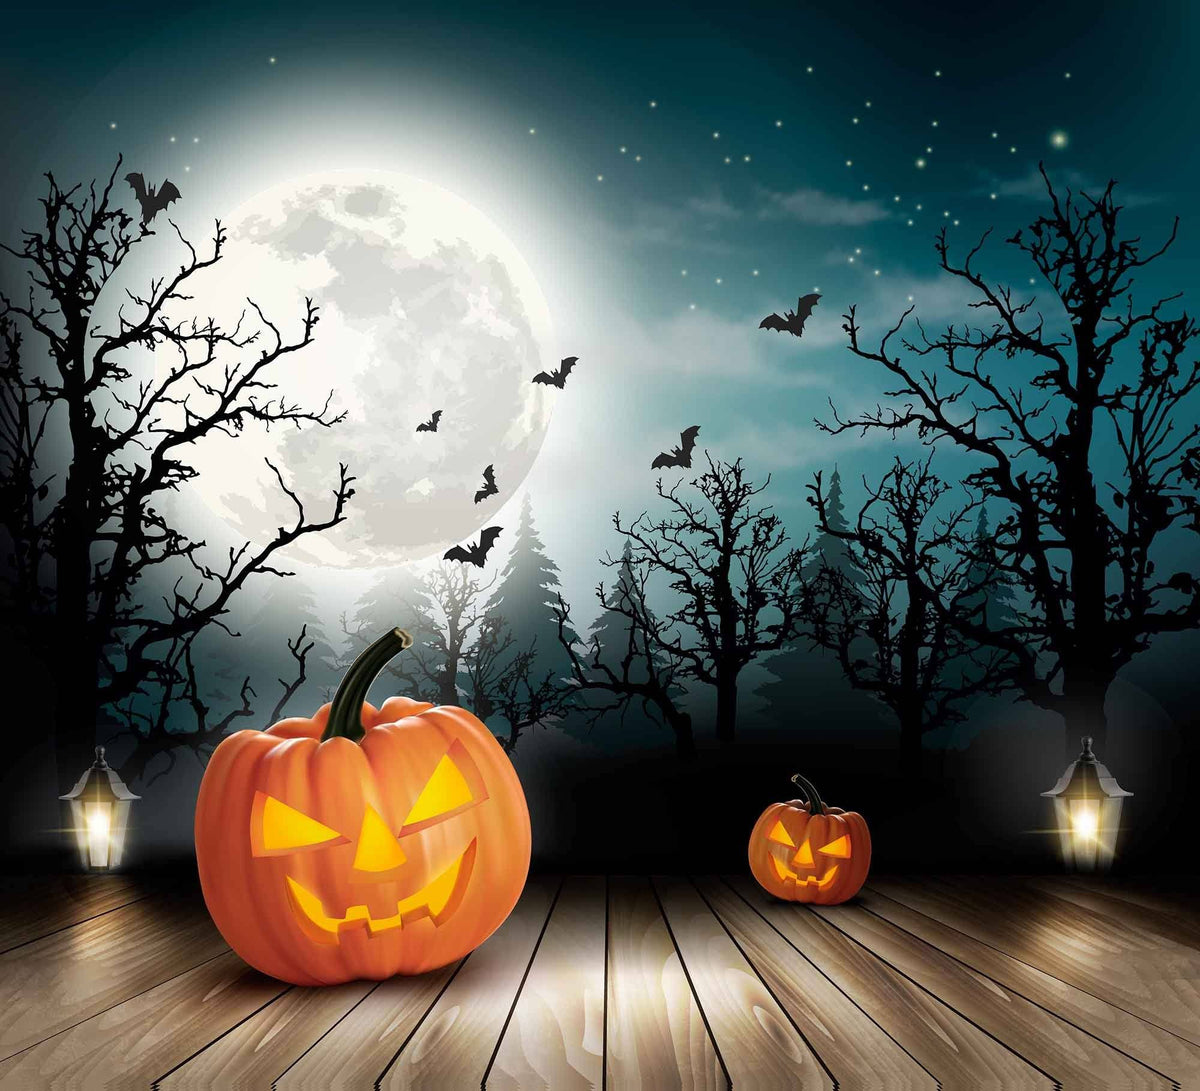 Horror Forest Background With Some Pumpkin On Wood Floor Photography Backdrops Shopbackdrop